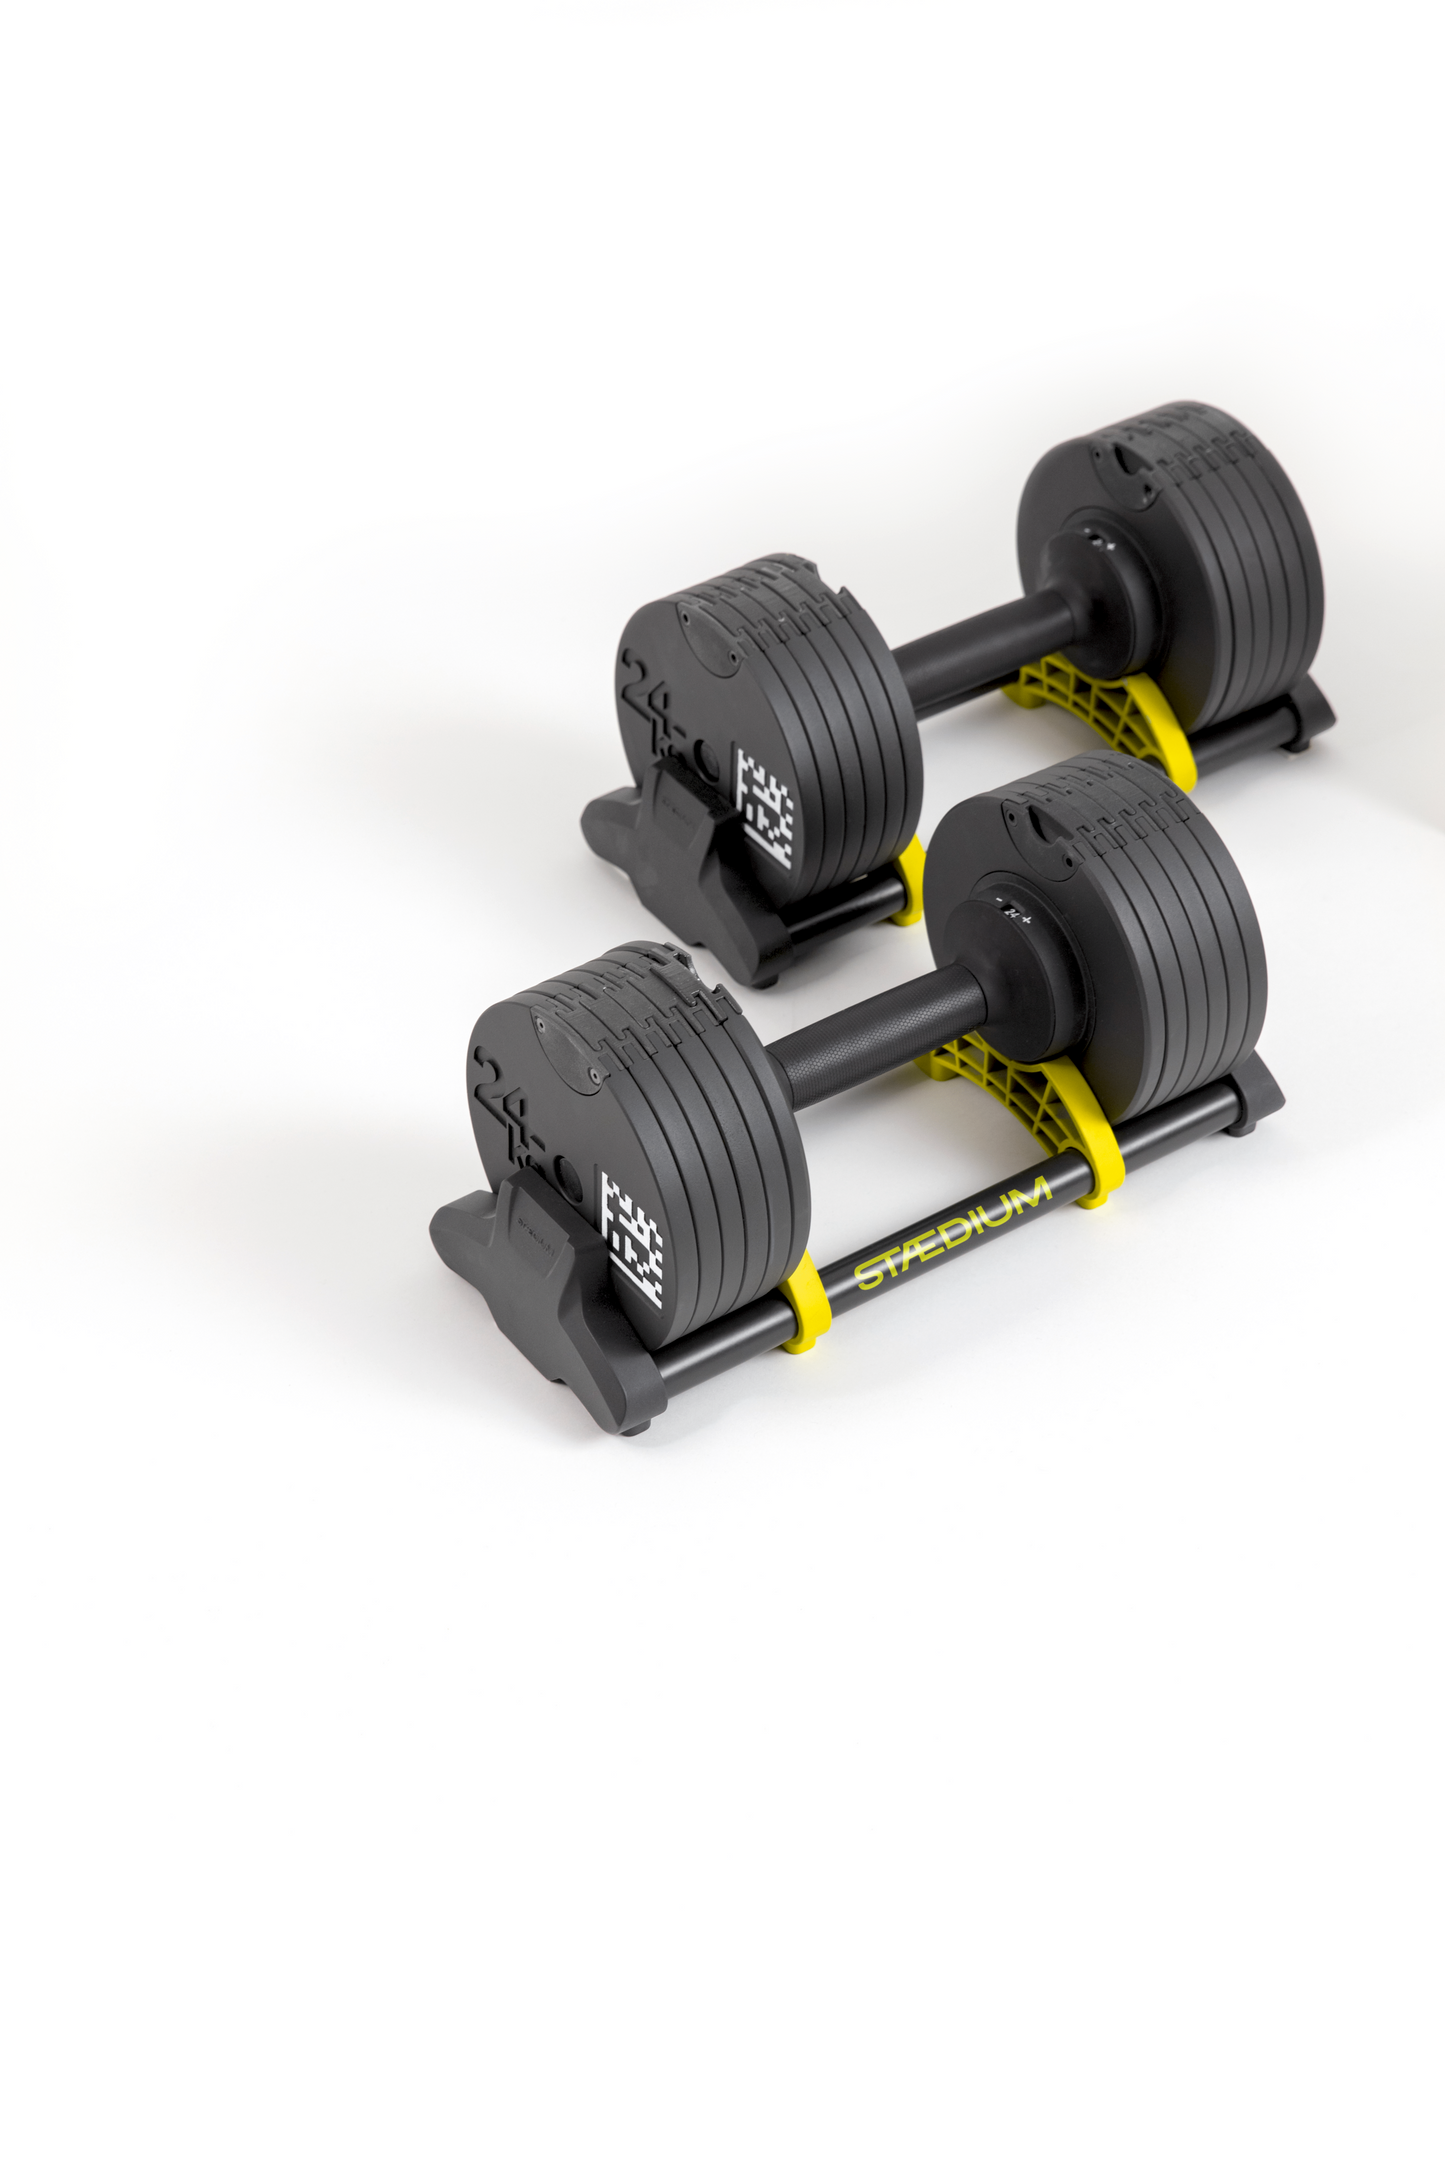 Adjustable Dumbbells by Freeletics - The Perfect Home Workout Equipment